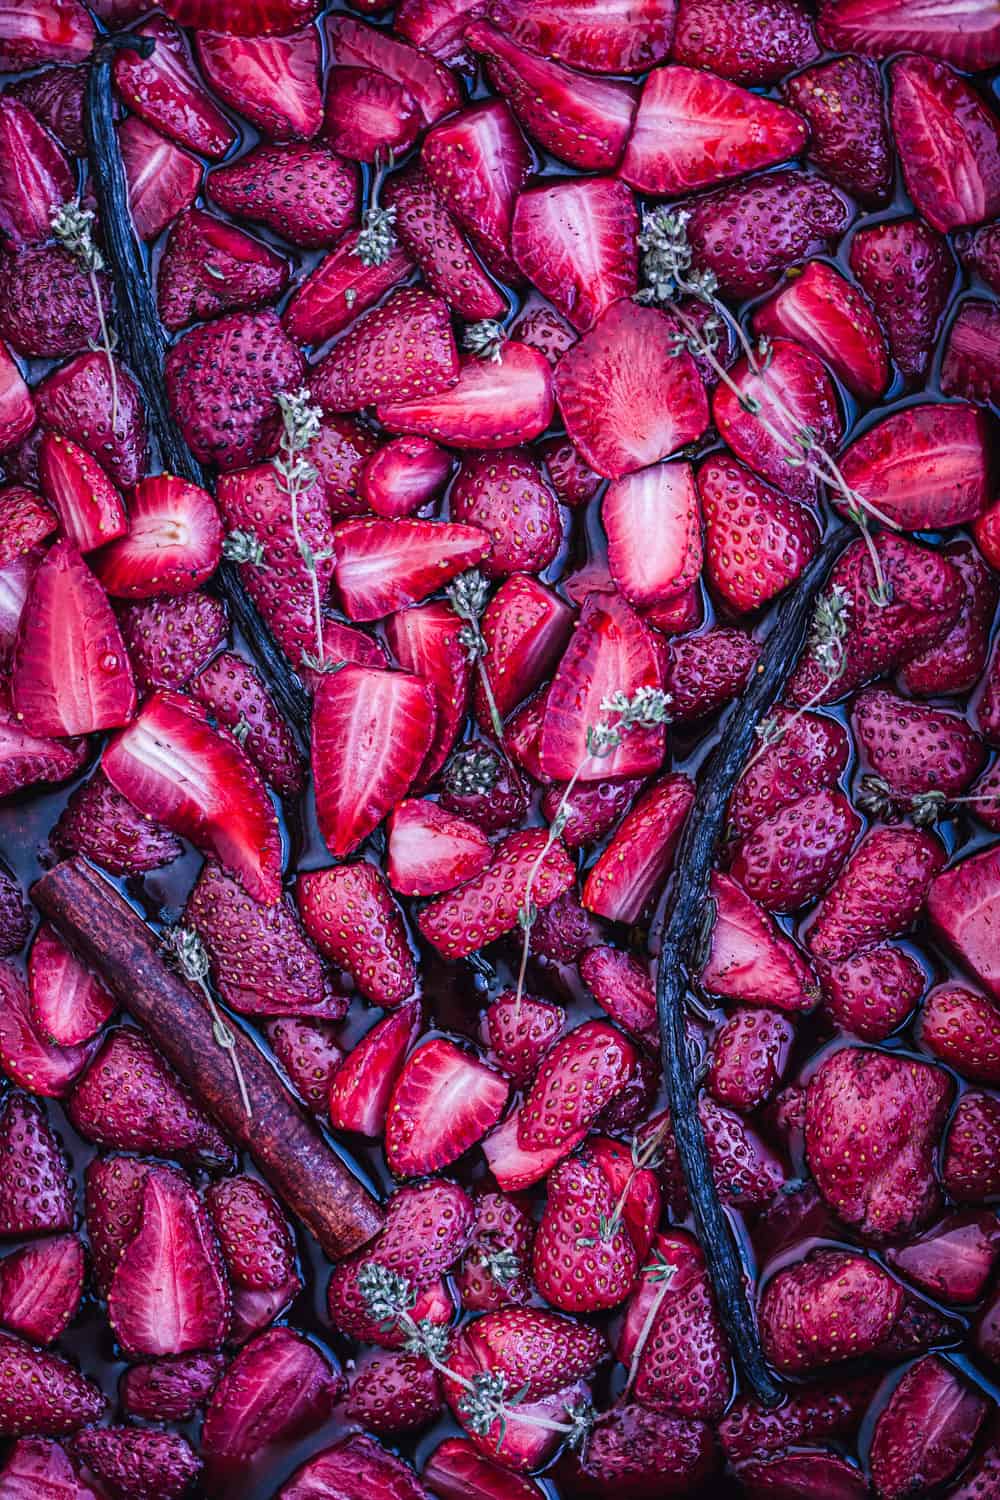 Cooked strawberries were roasted with thyme and vanilla just out of the oven, overhead shot.